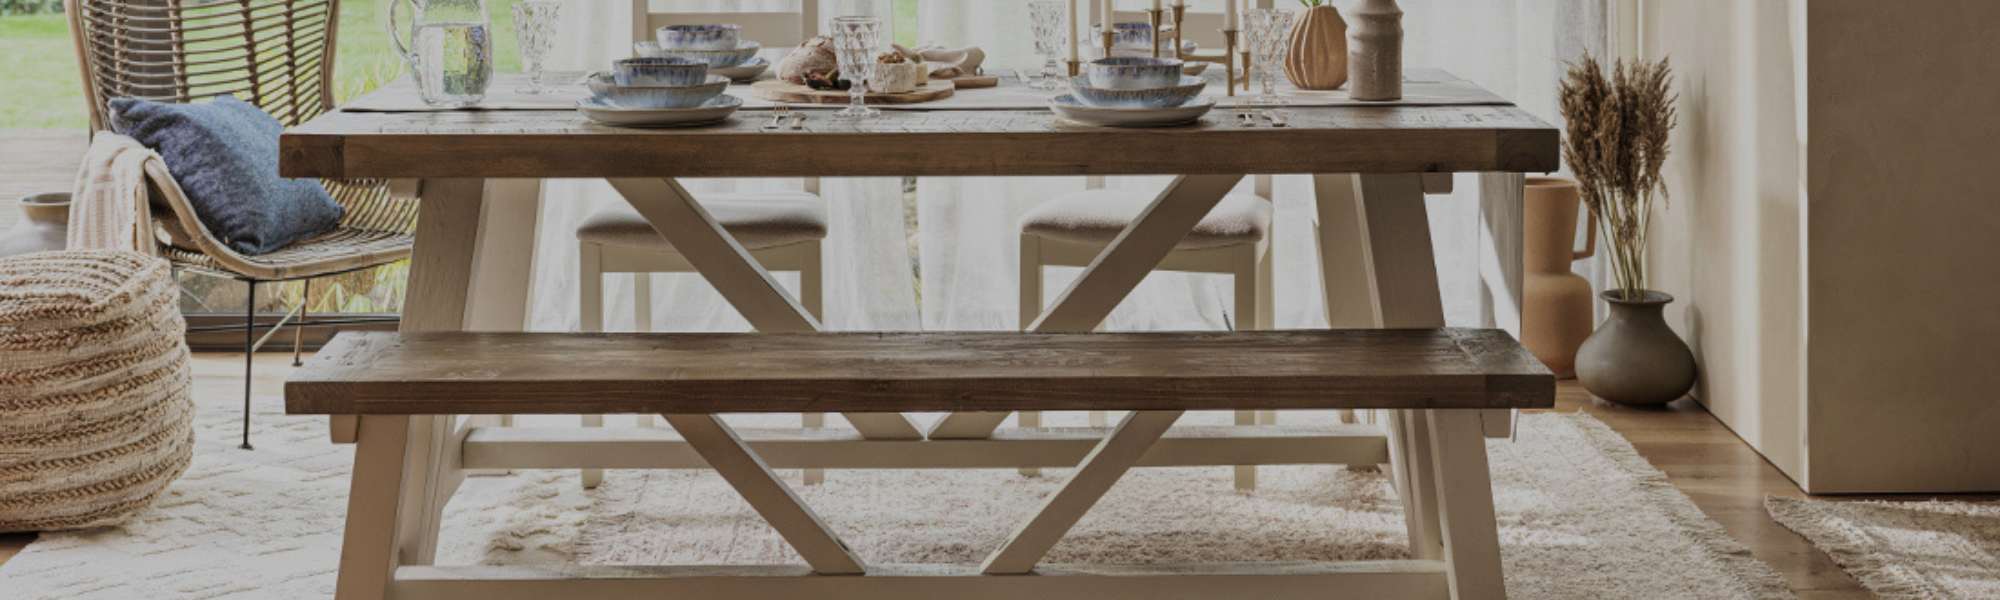 Dine with History: Reclaimed Wood makes for Soulful Dining Furniture